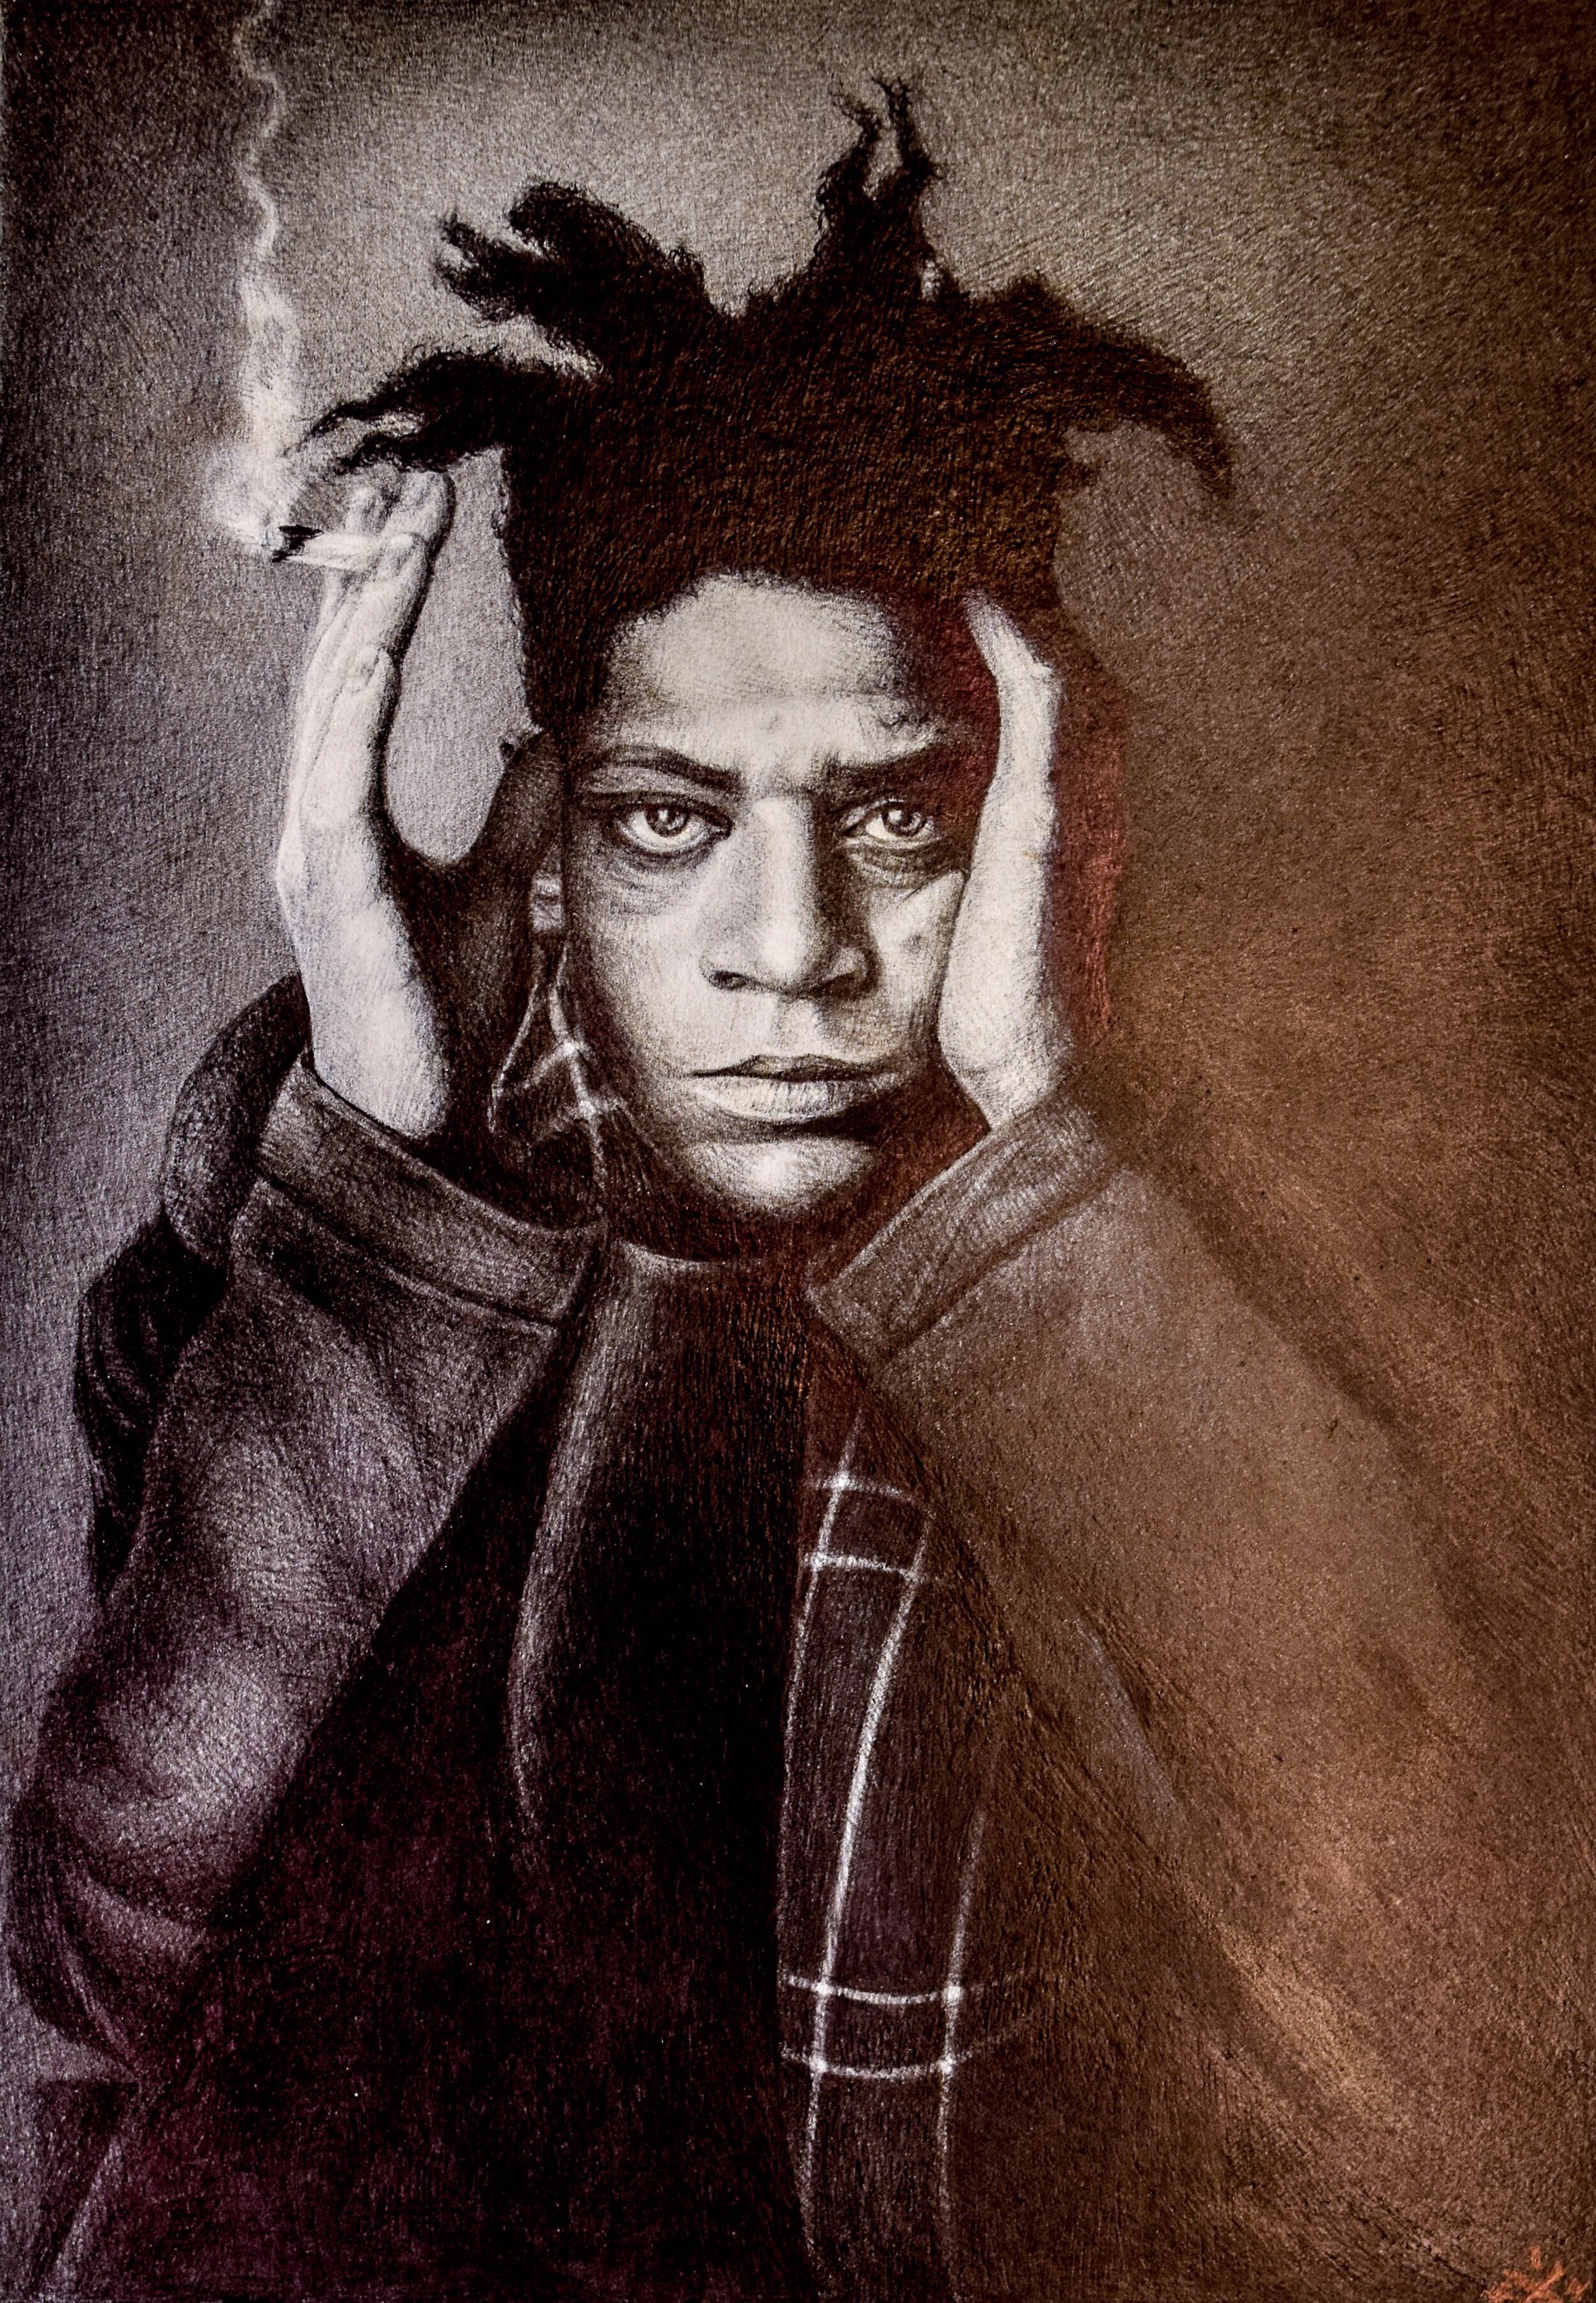 A Genius Destroyed By Addiction, Jean-Michel Basquiat by The Exile